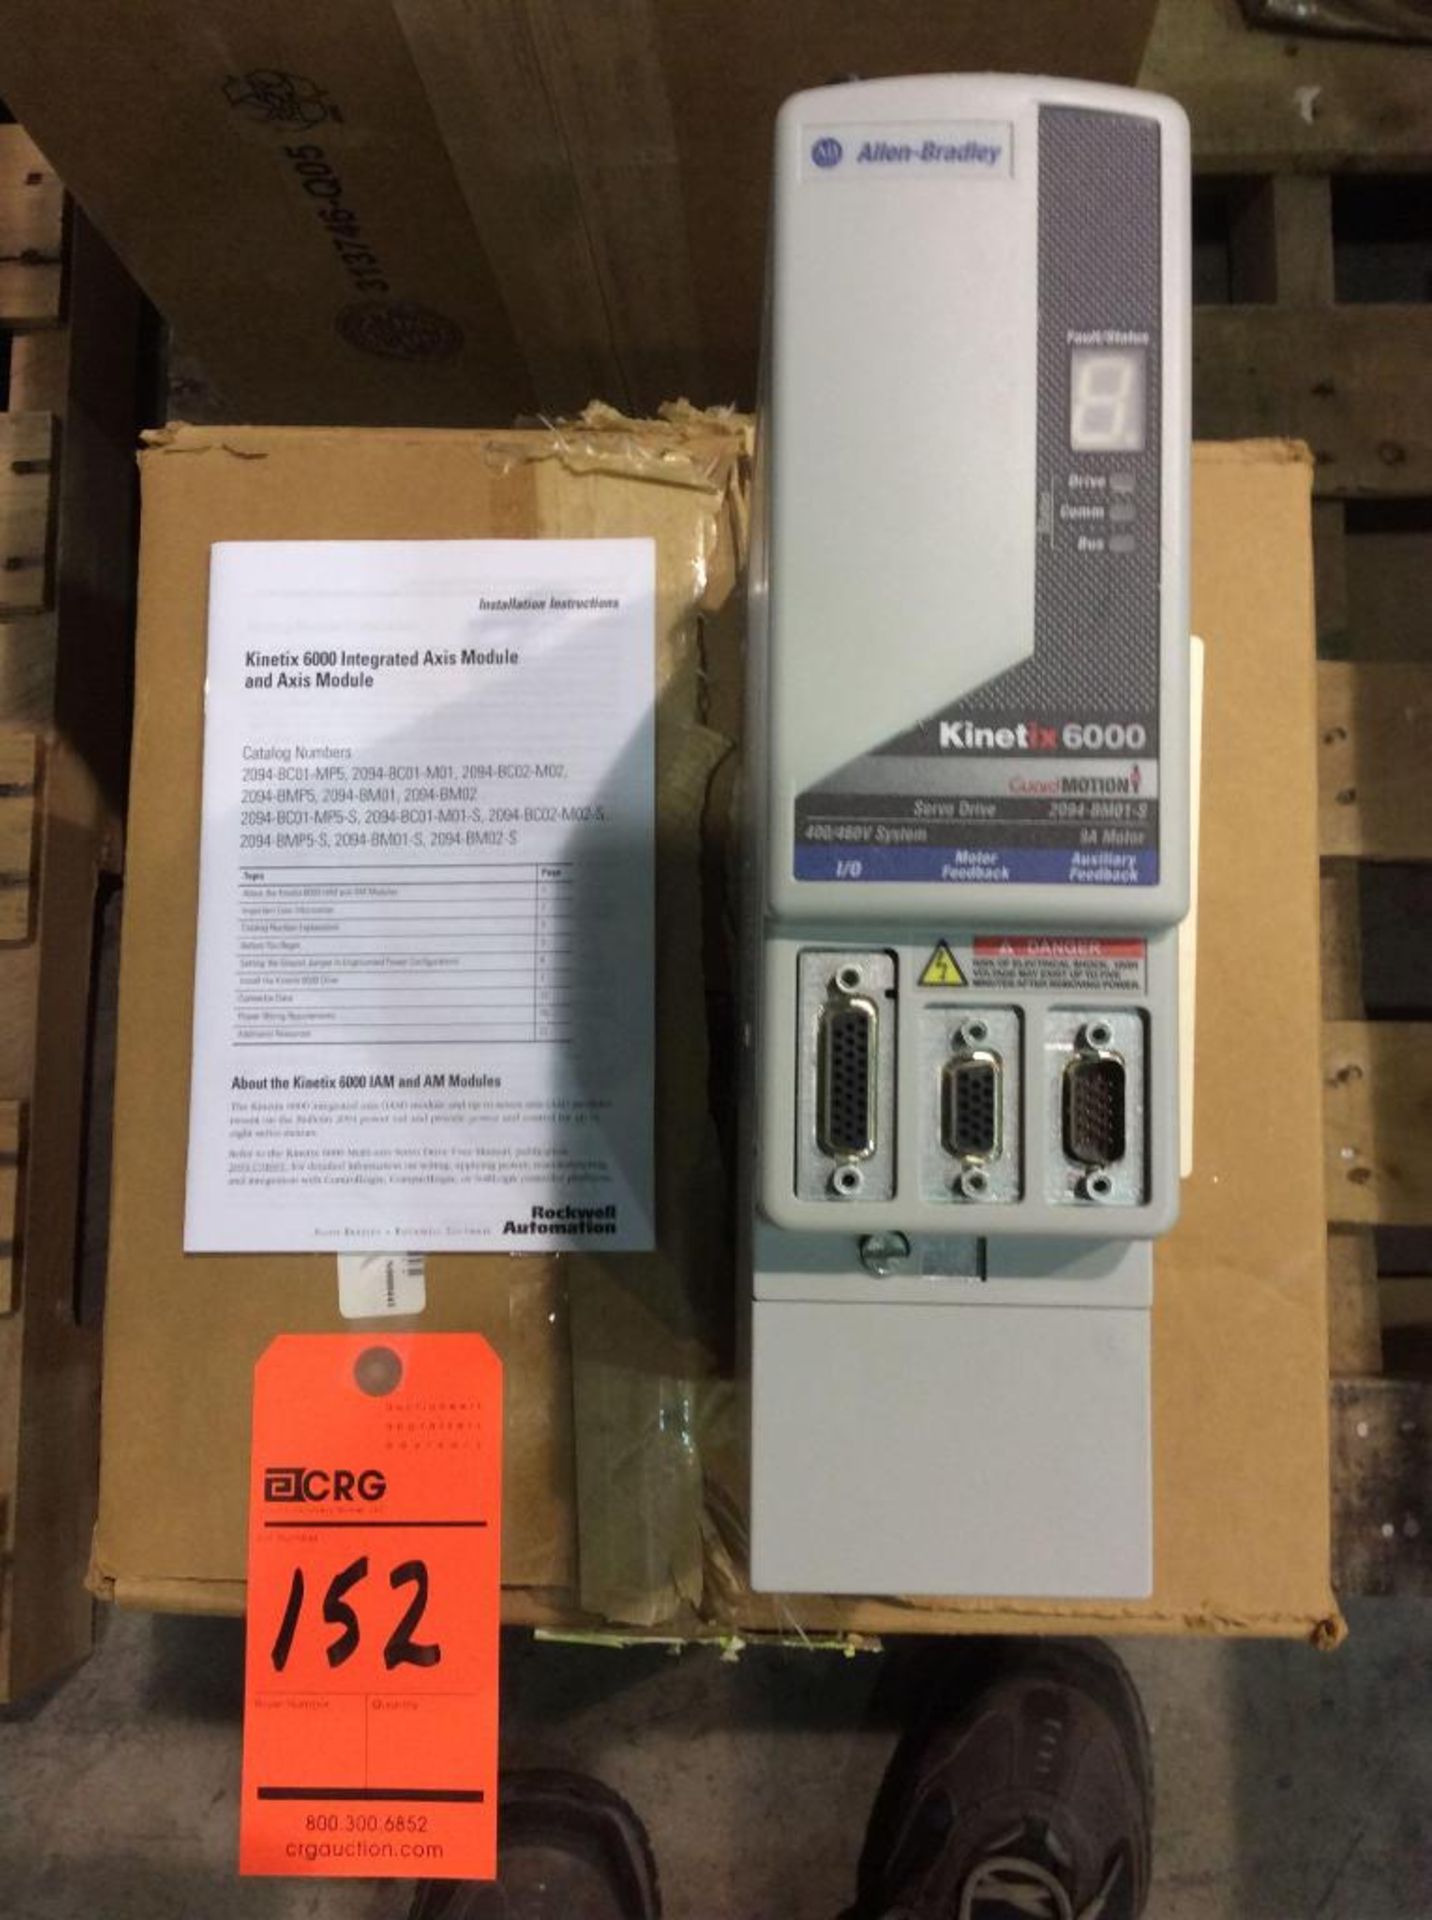 Allen Bradley Kinetix 6000 Integrated Axis Module and Axis Module, mn 2094-BM01-S (NEW) - Image 2 of 3